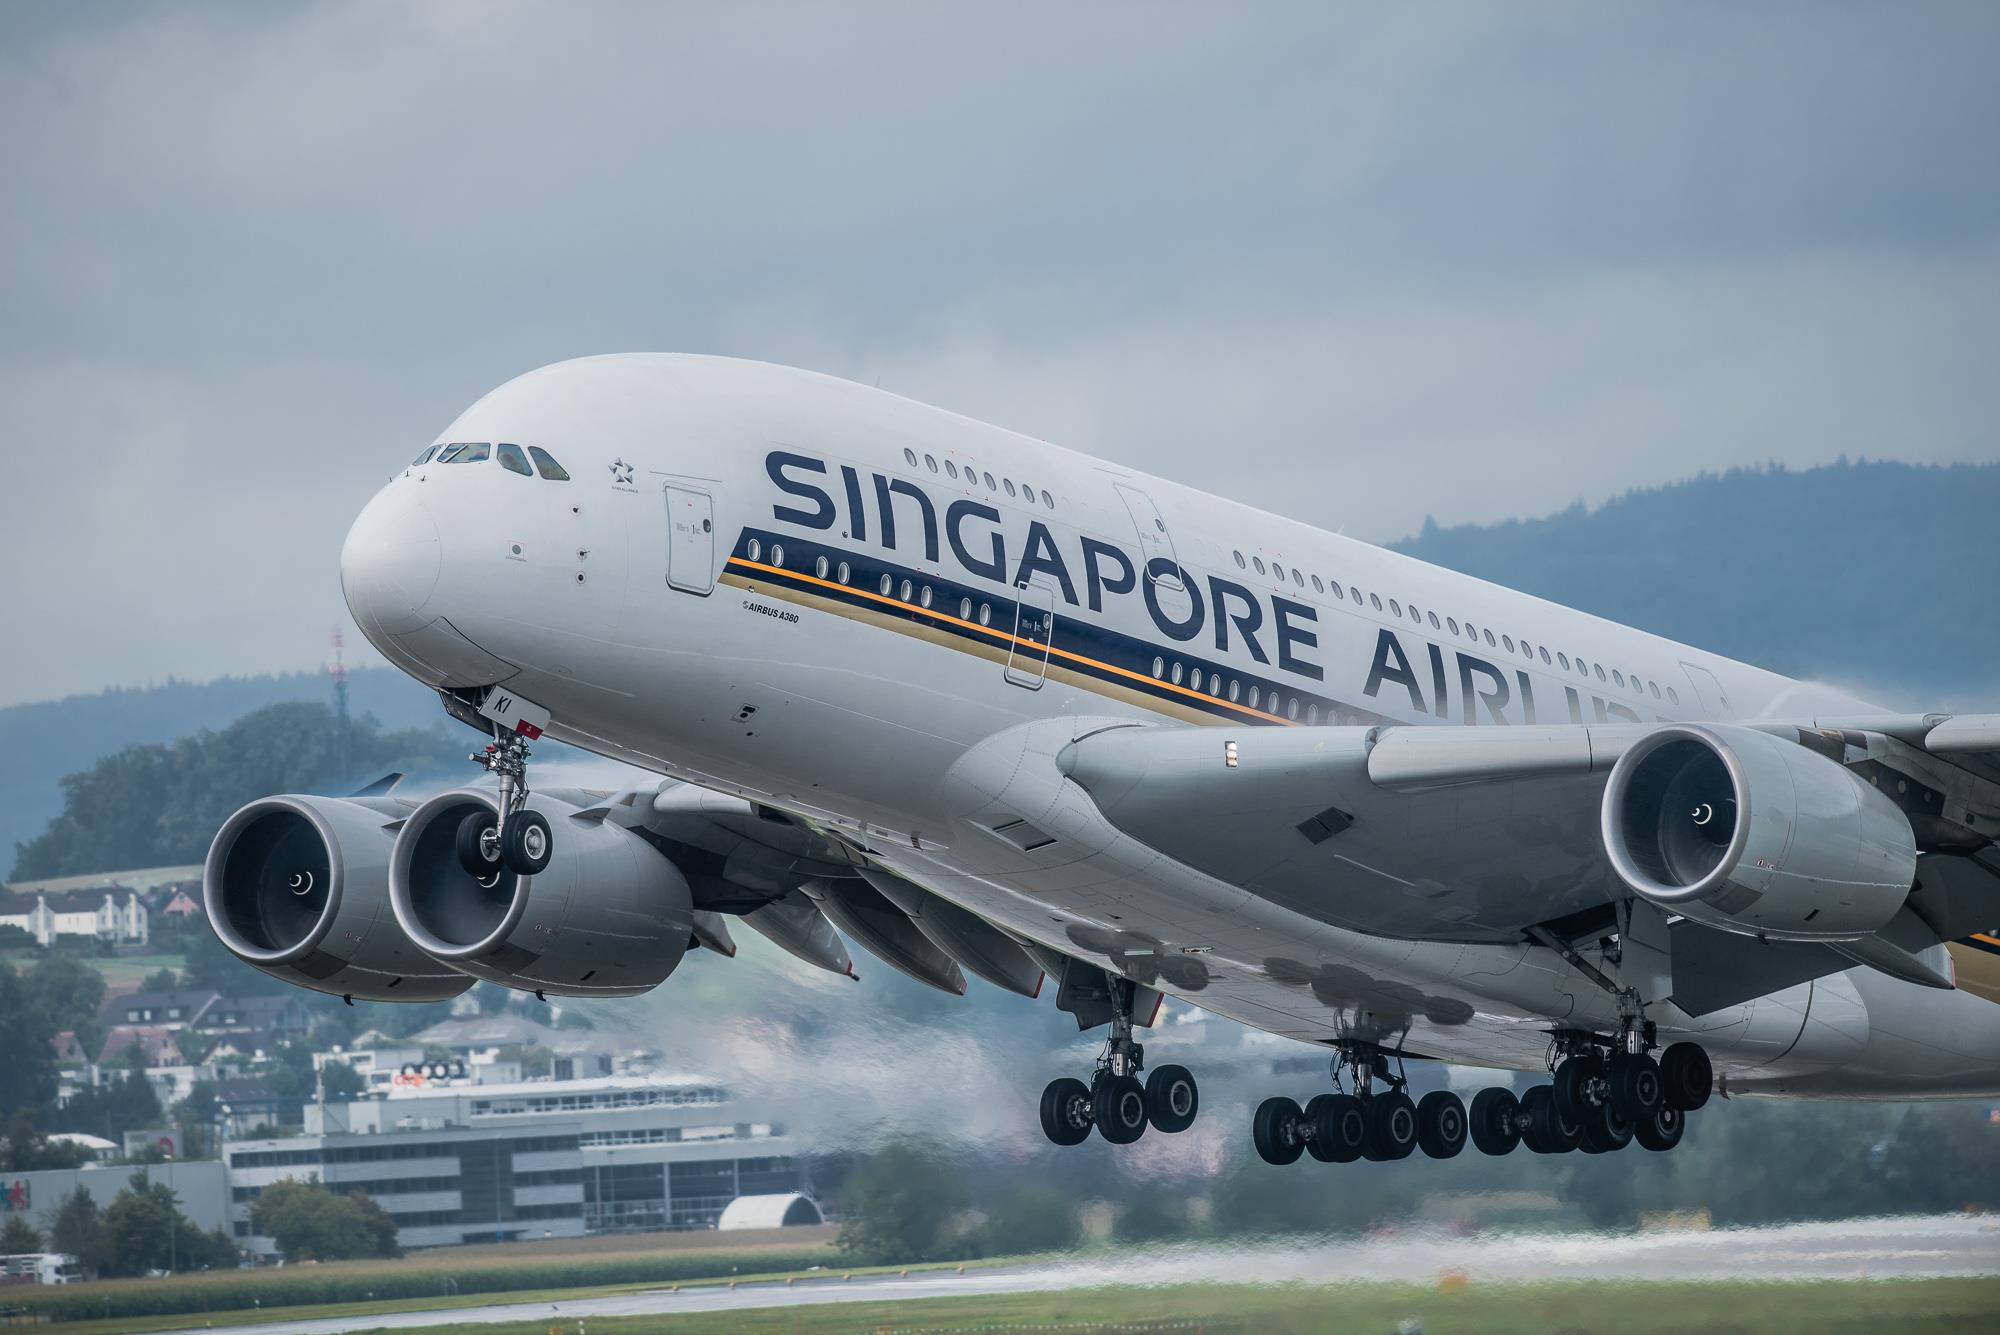 Singapore Airlines A380 leaving